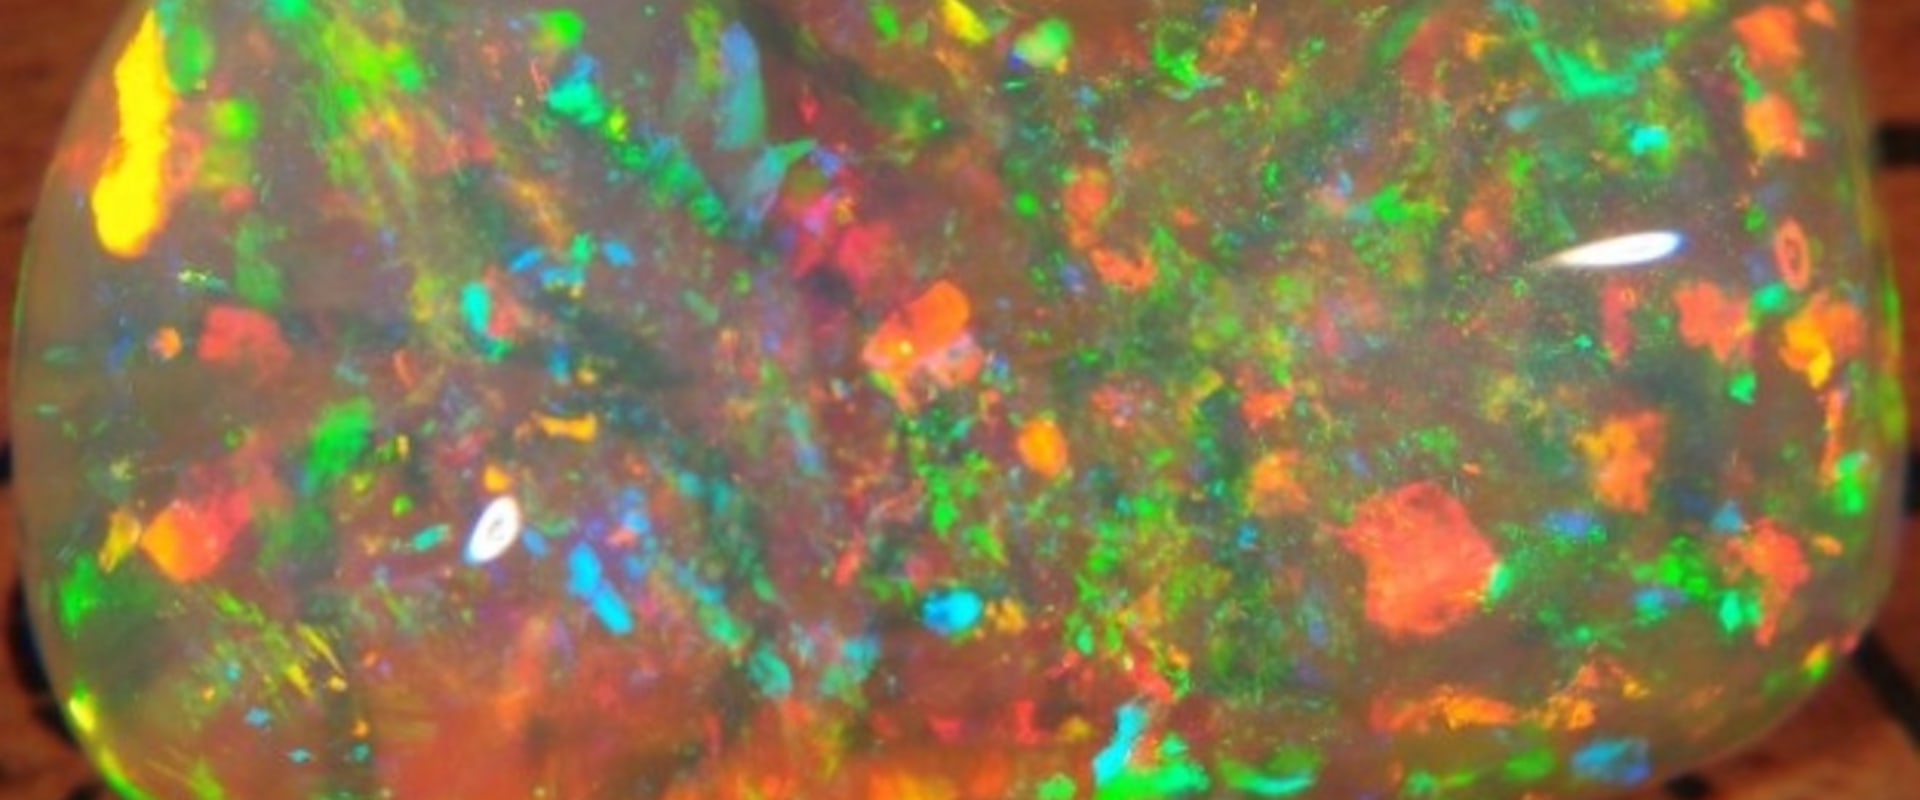 Why opal is mineral?